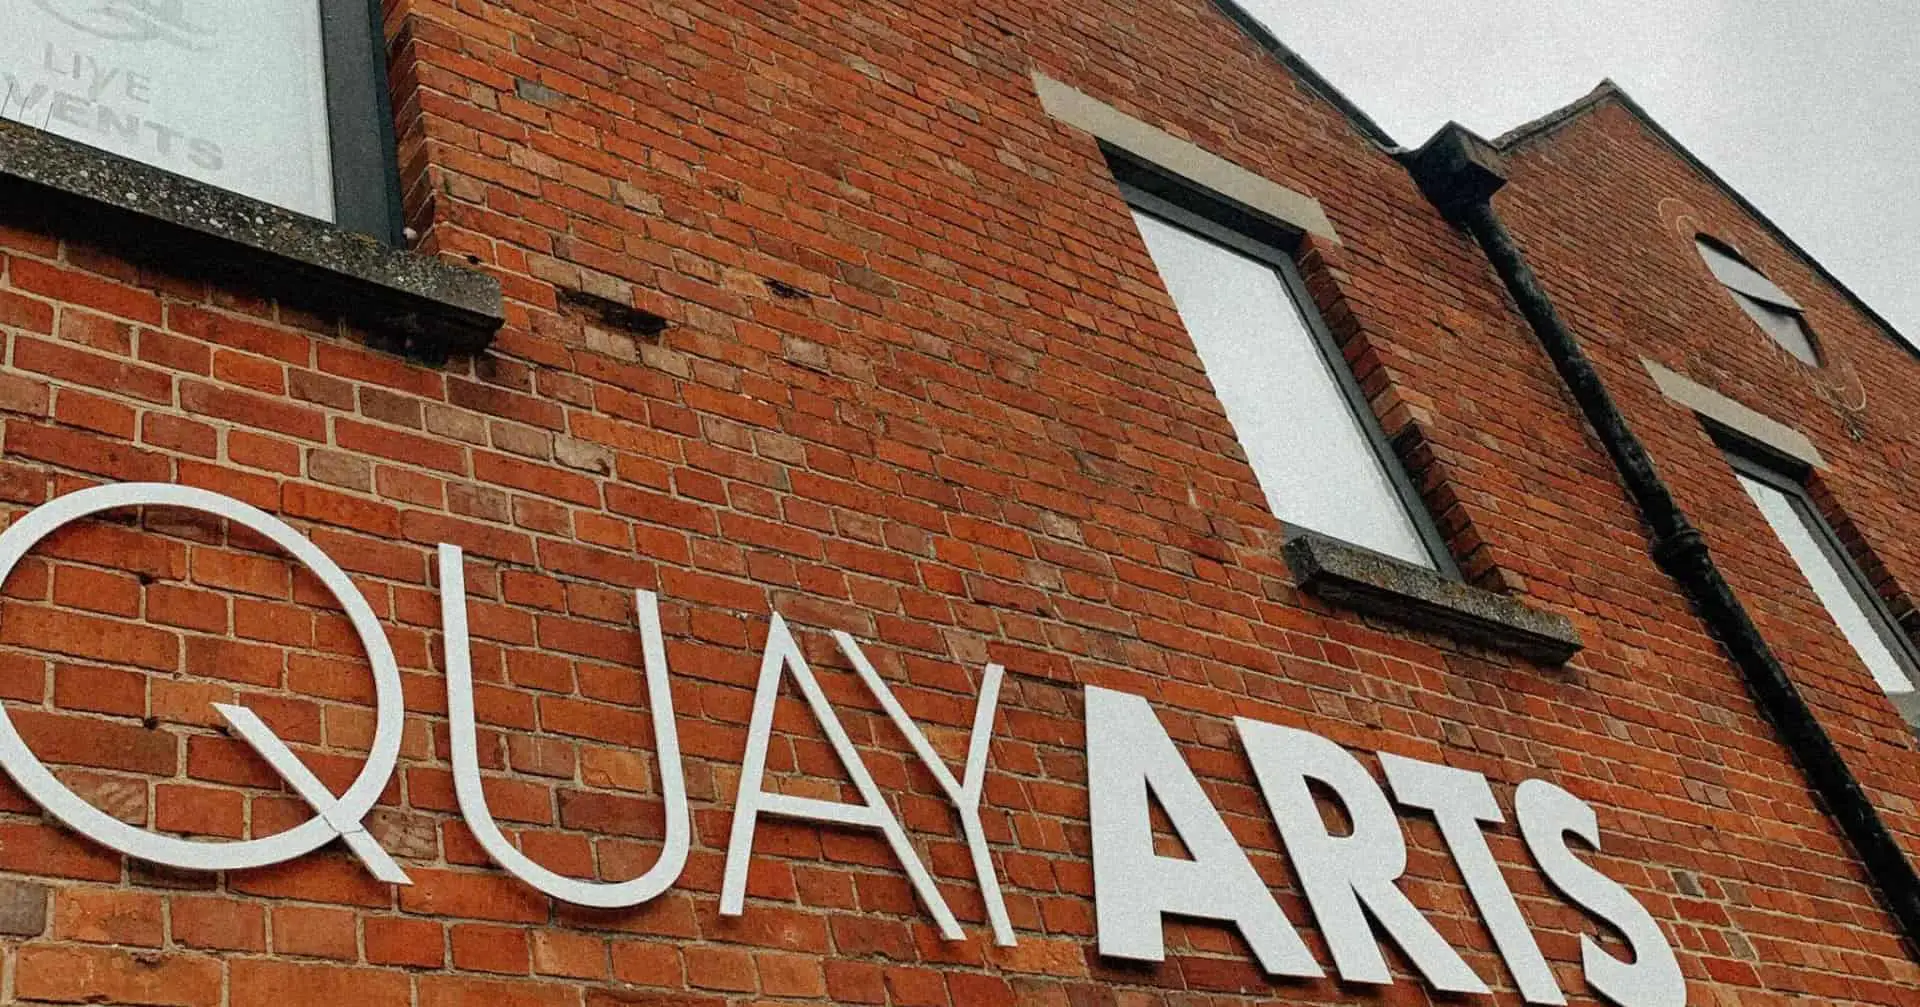 side of quay arts building